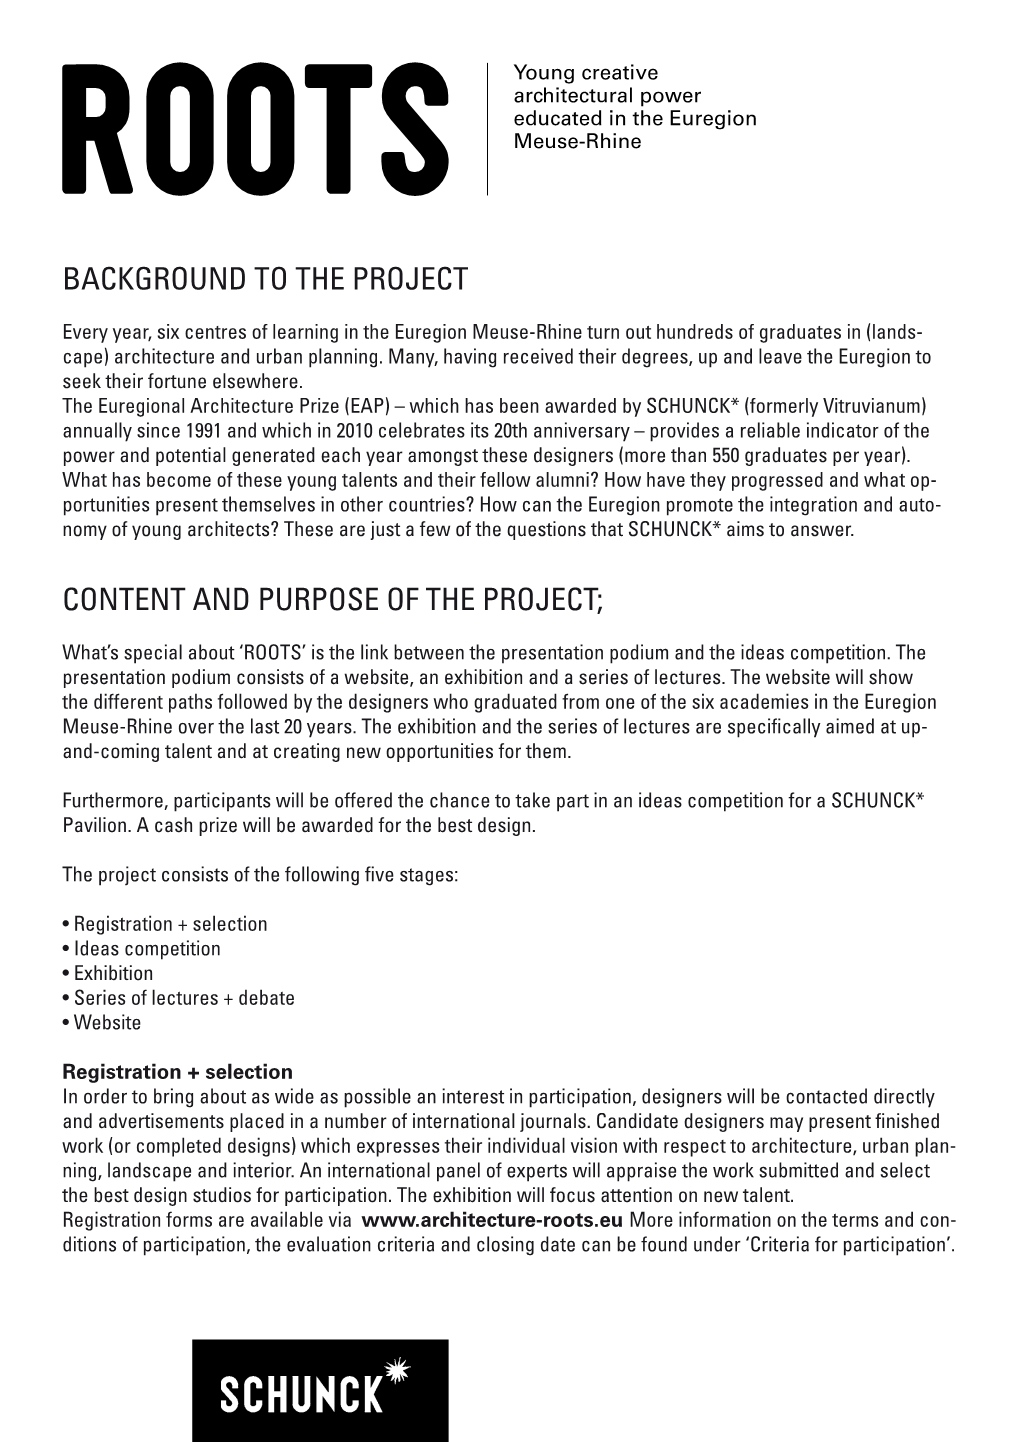 Background to the Project Content and Purpose of the Project;